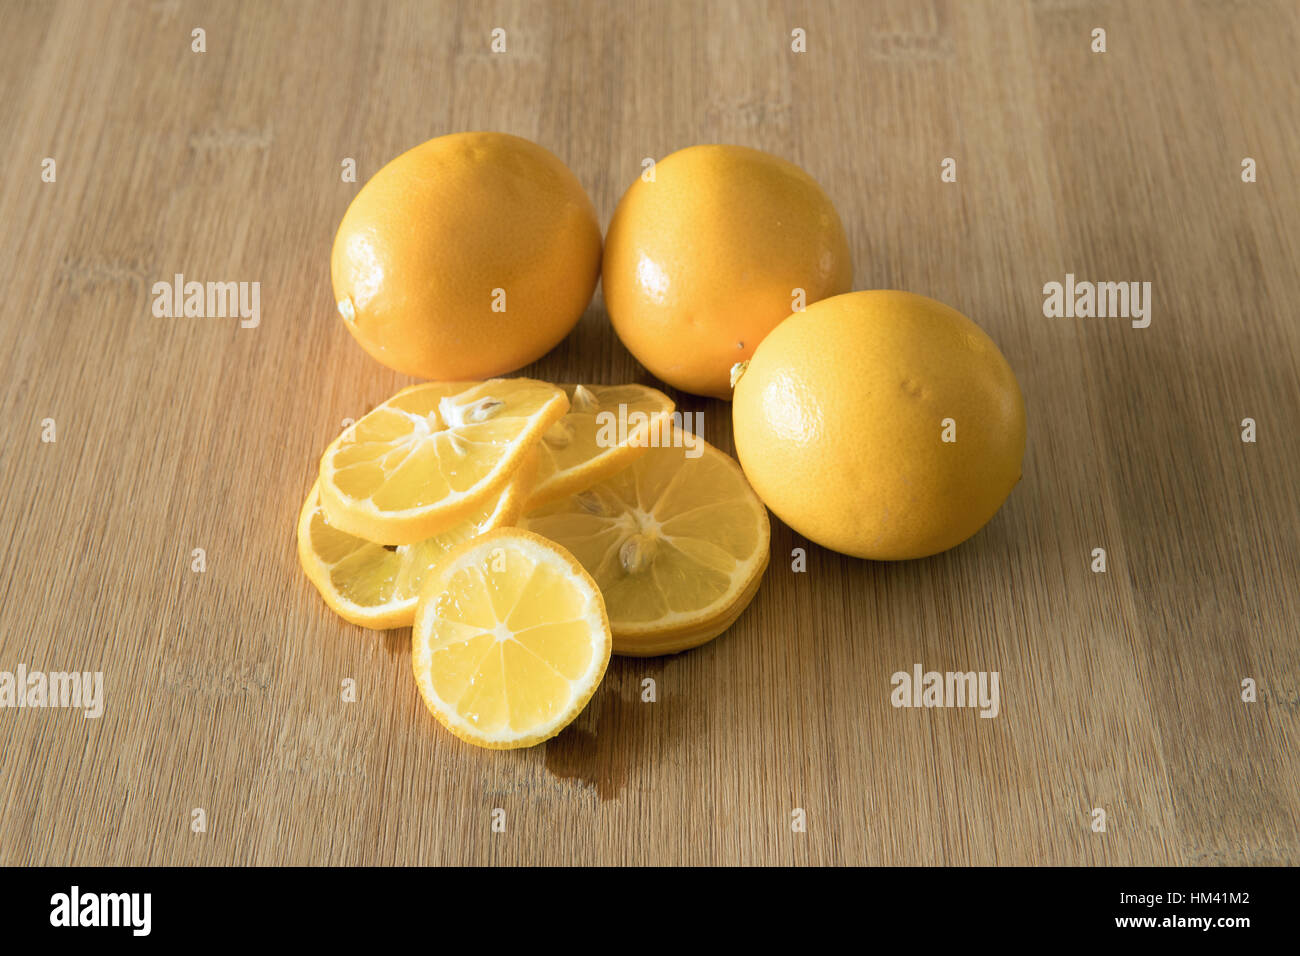 Sliced and unsliced lemons on cutting board Stock Photo